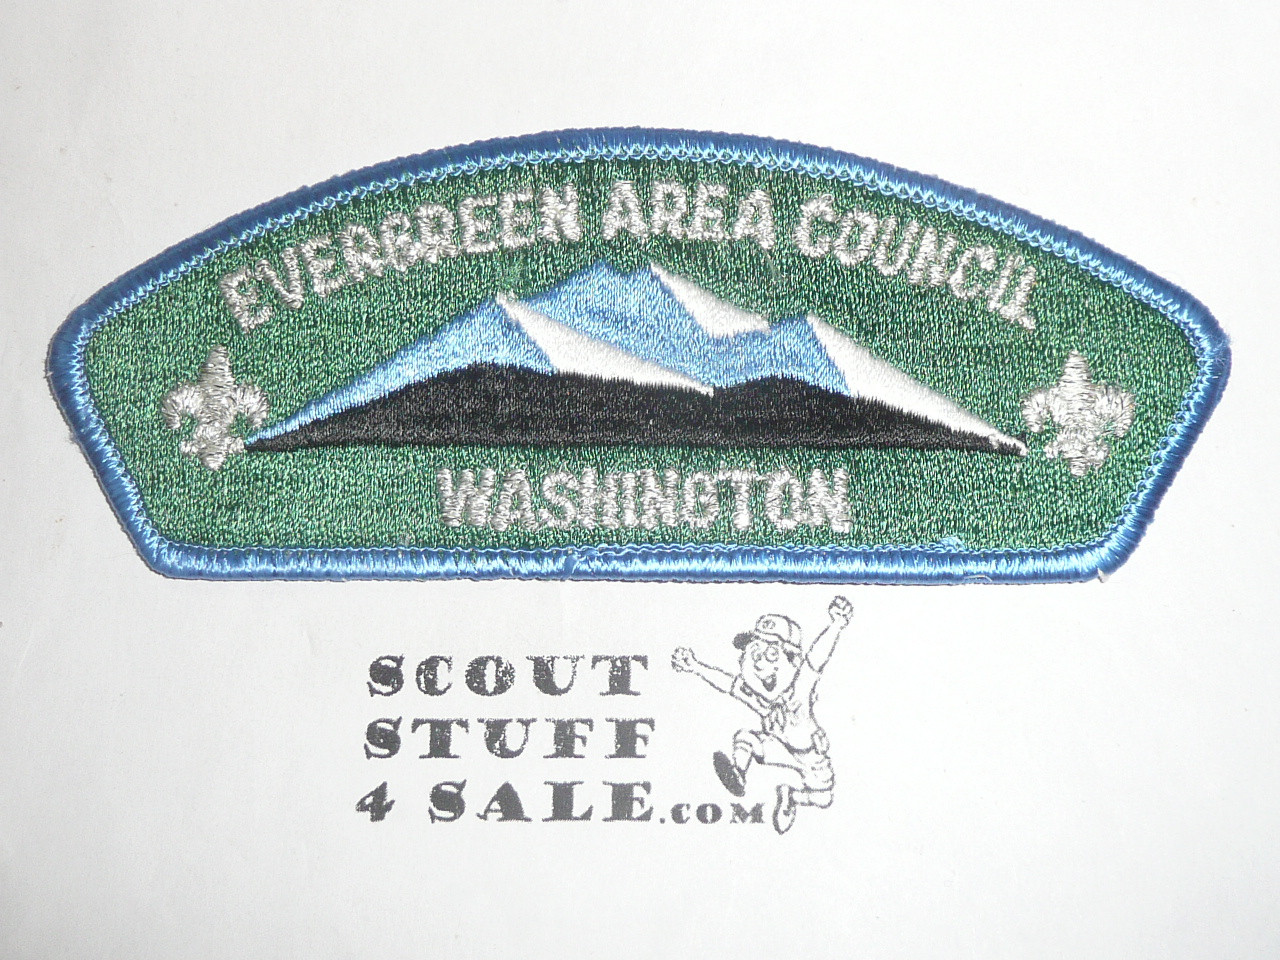 Evergreen Area Council s2a CSP - Scout - MERGED